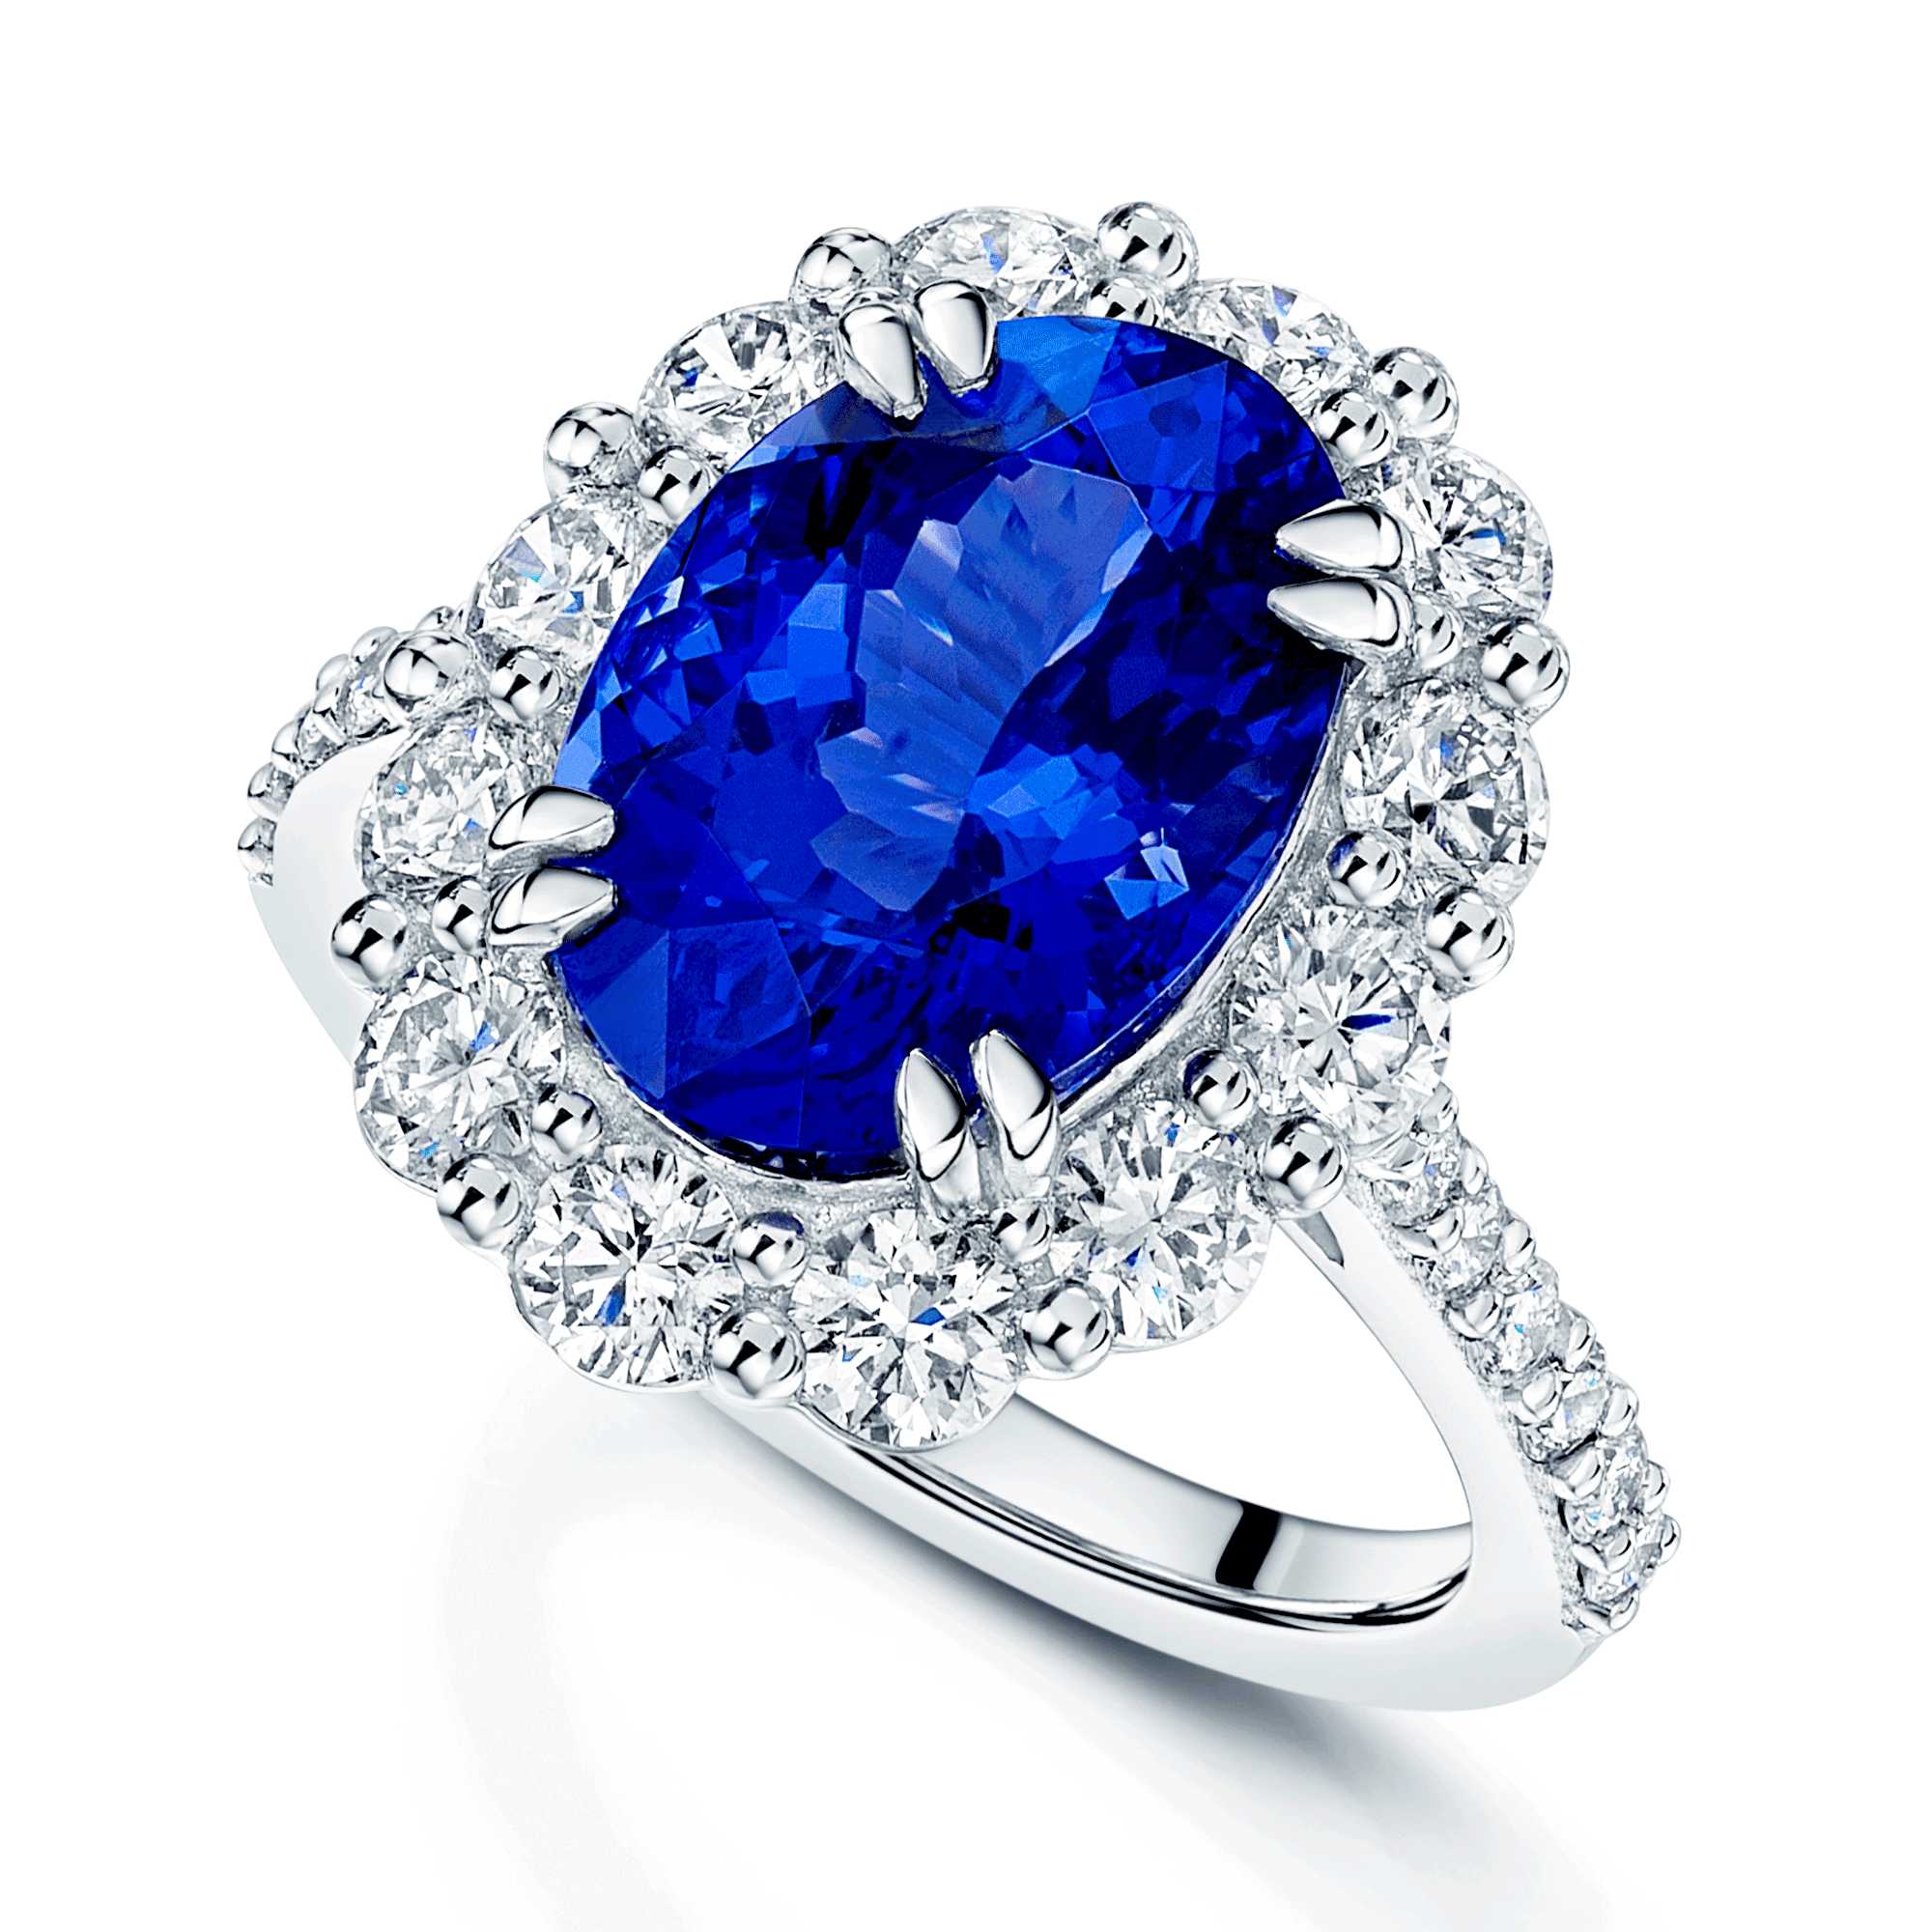 Platinum Oval Claw Set Tanzanite 5.89ct And Diamond Cluster Ring 1.70ct With Diamond Set Shoulders